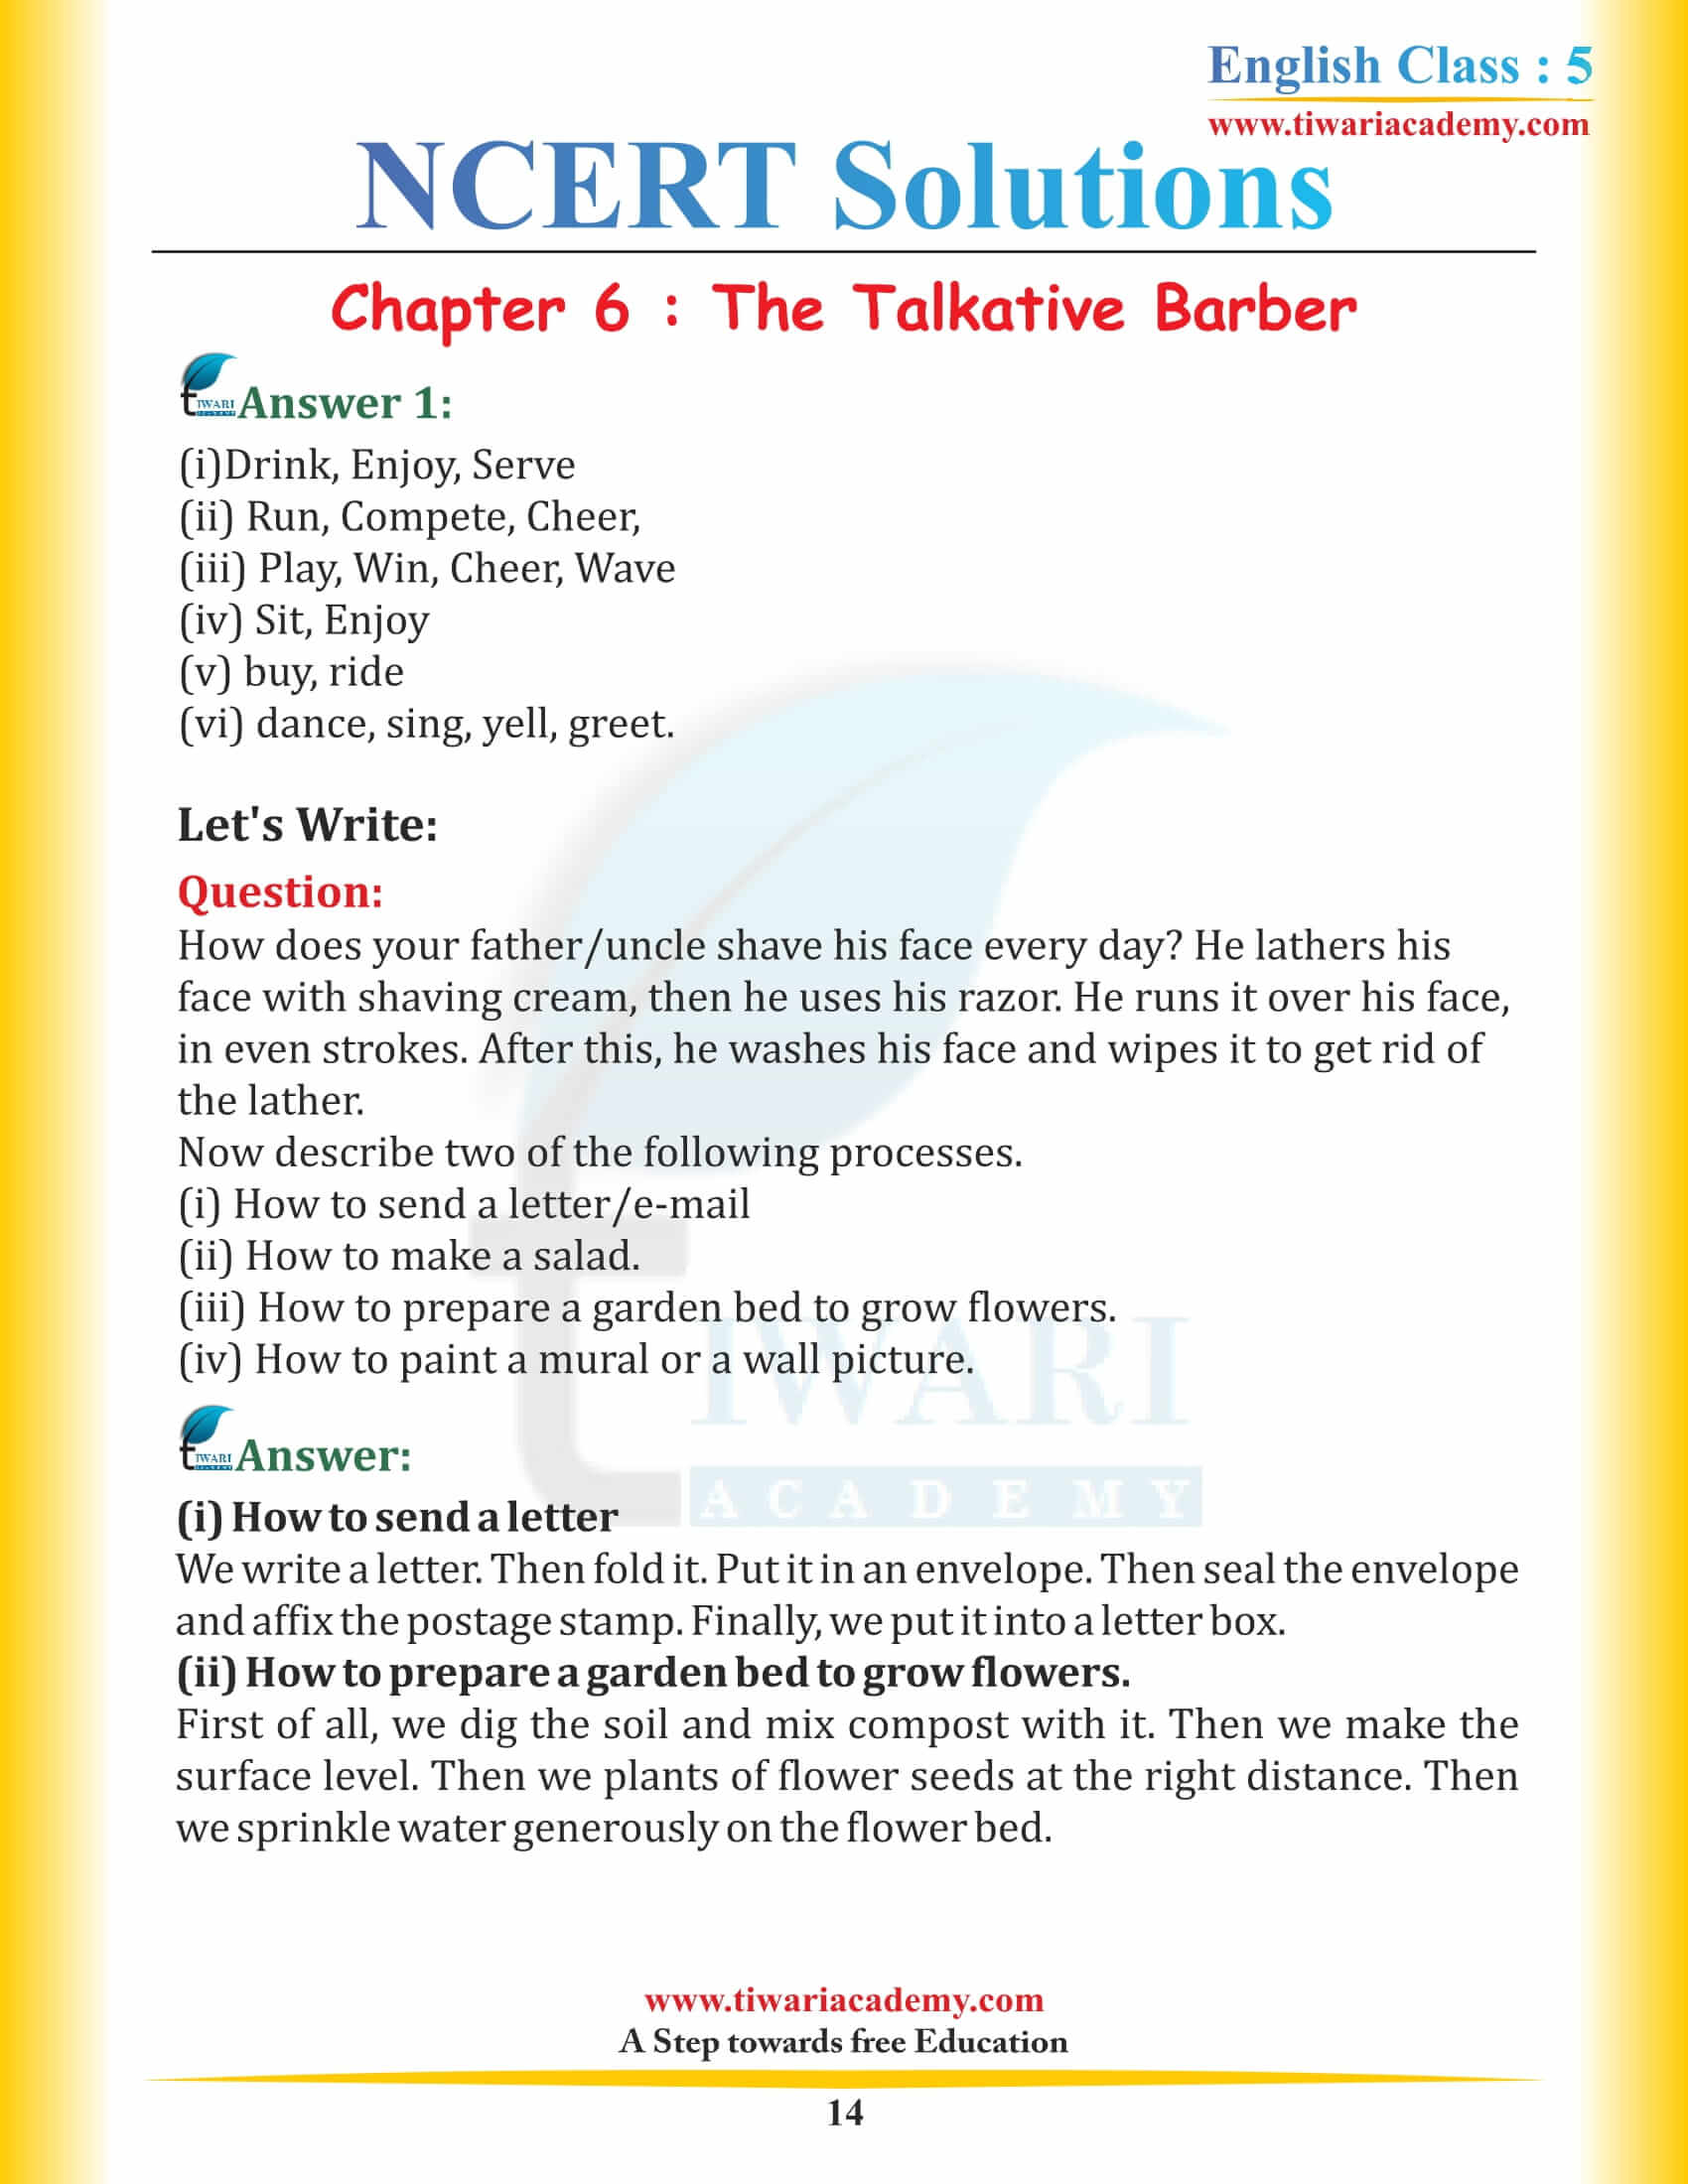 NCERT Solutions for Class 5 English Chapter 6